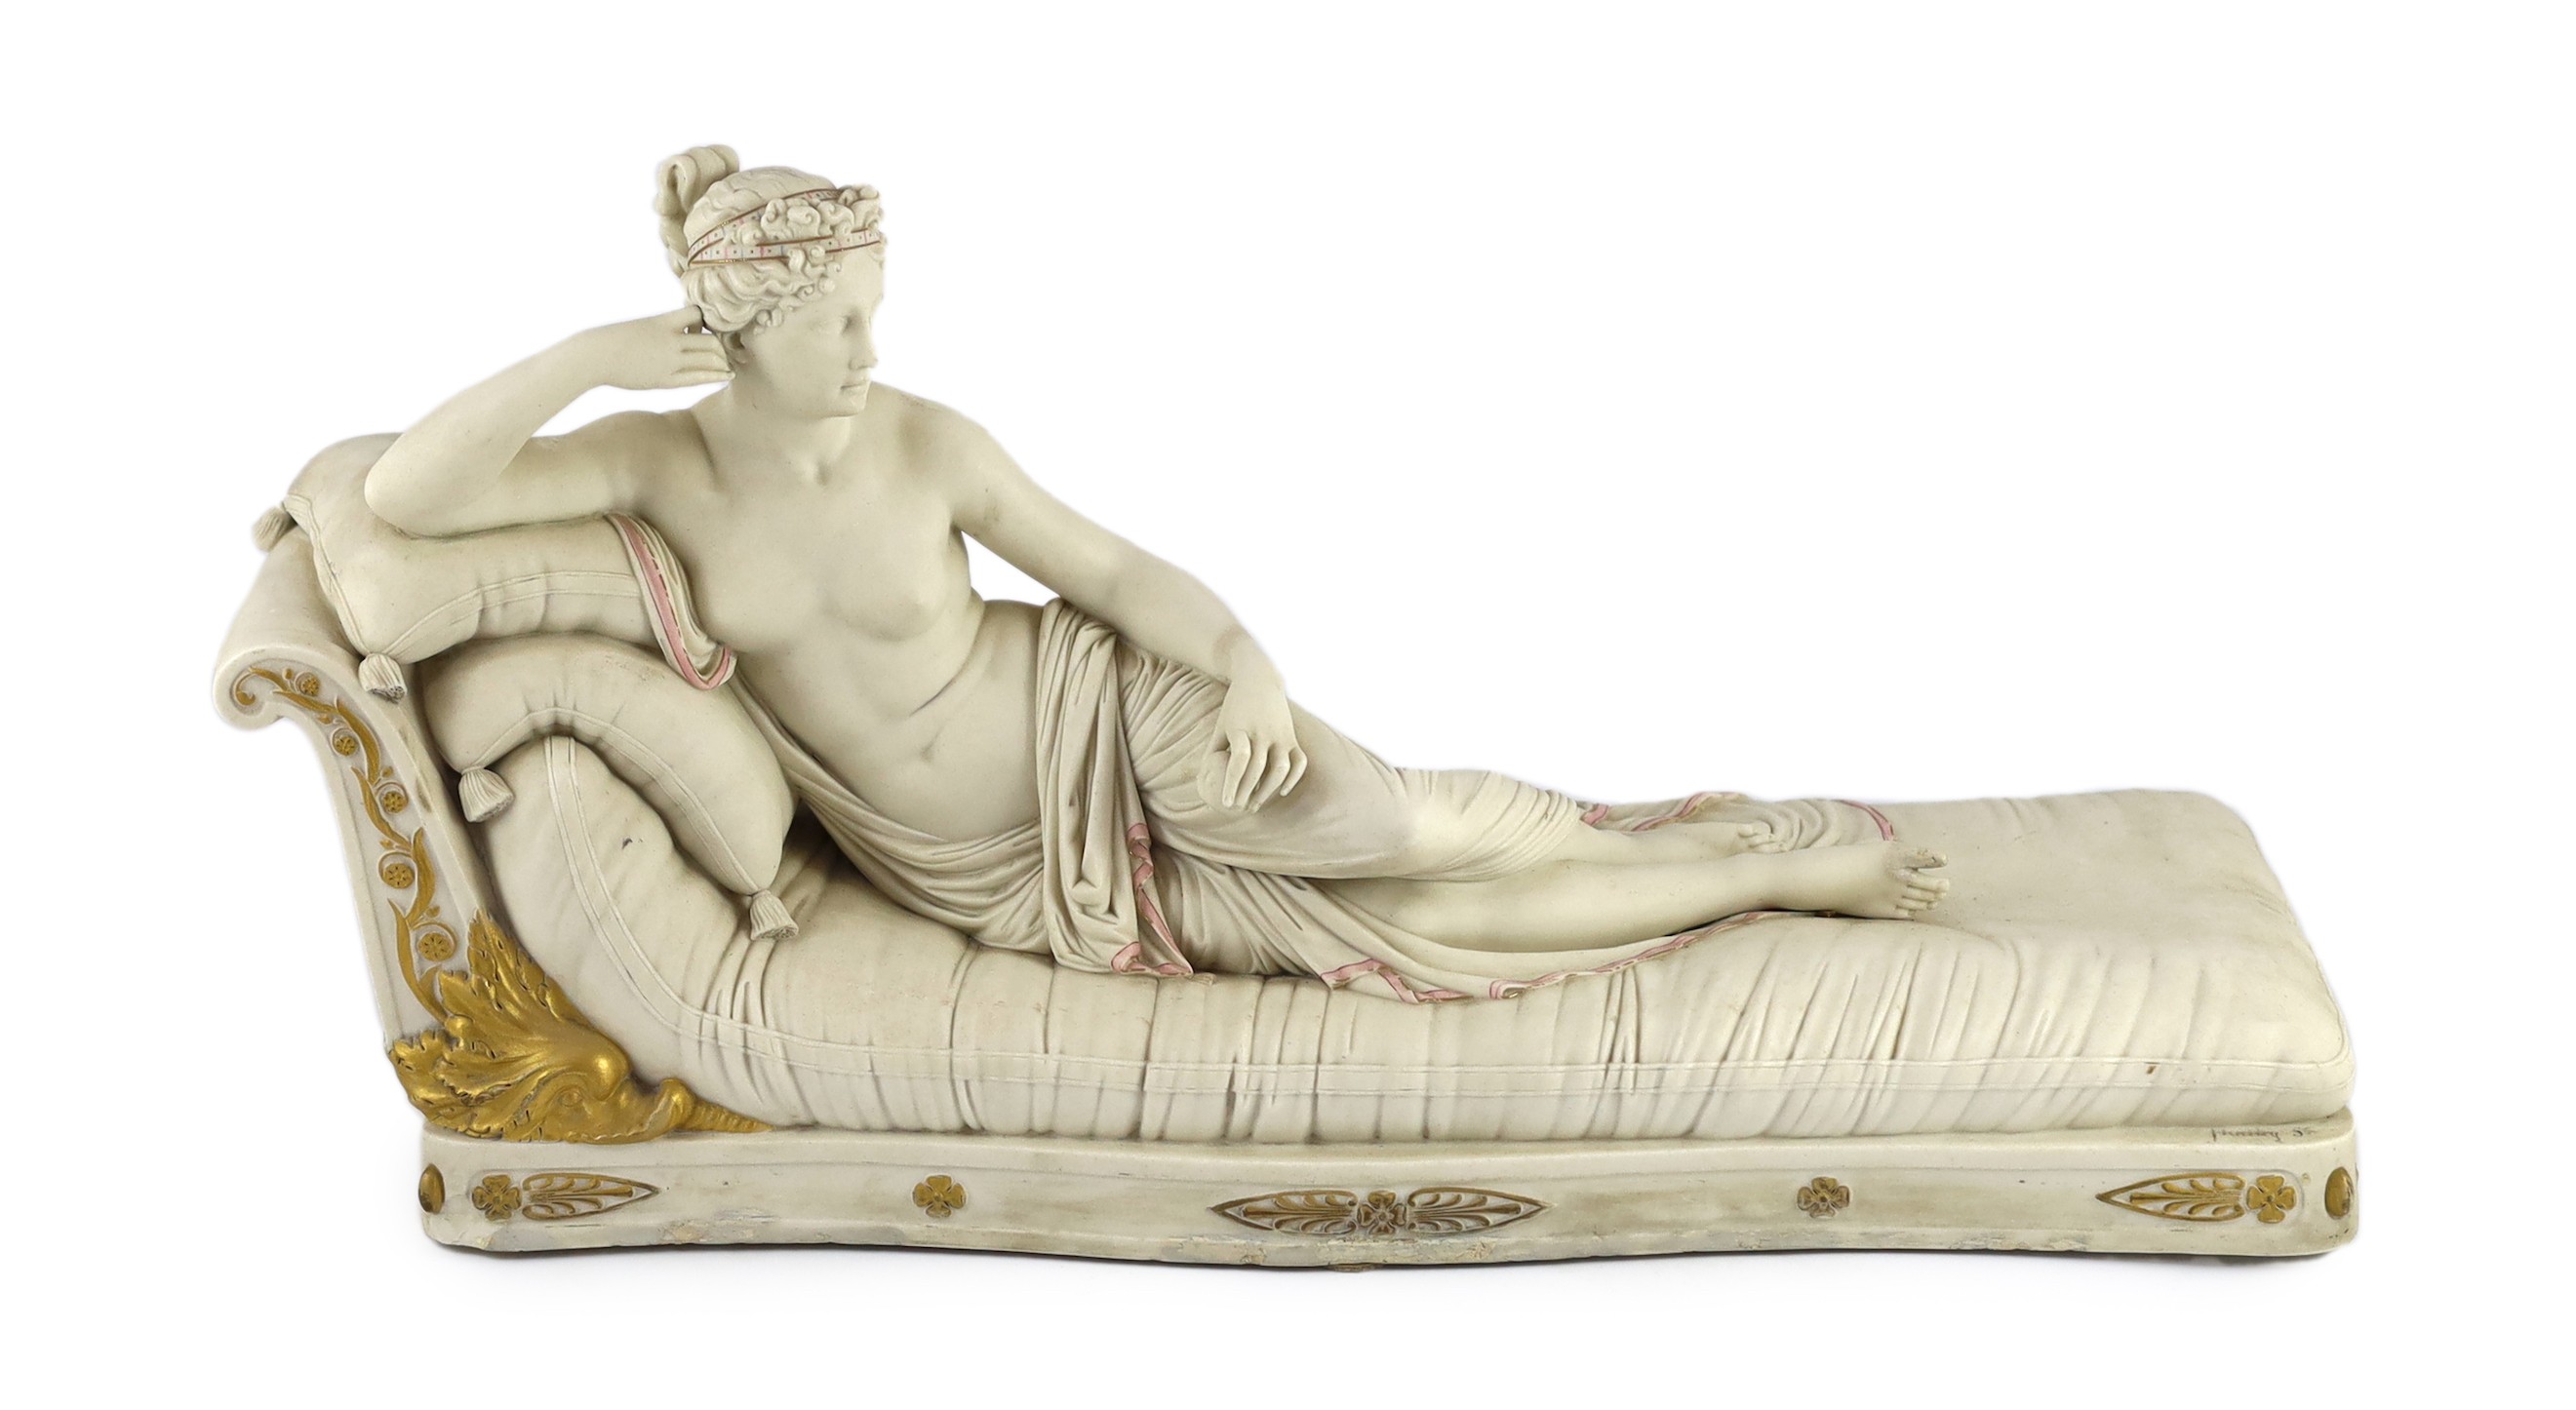 A Royal Worcester parian figure, after Antonio Canova, of Pauline Borghese as Venus Victorious, modelled by James Hadley, c.1866, 59.5cm long, some restoration to edge of base                                             